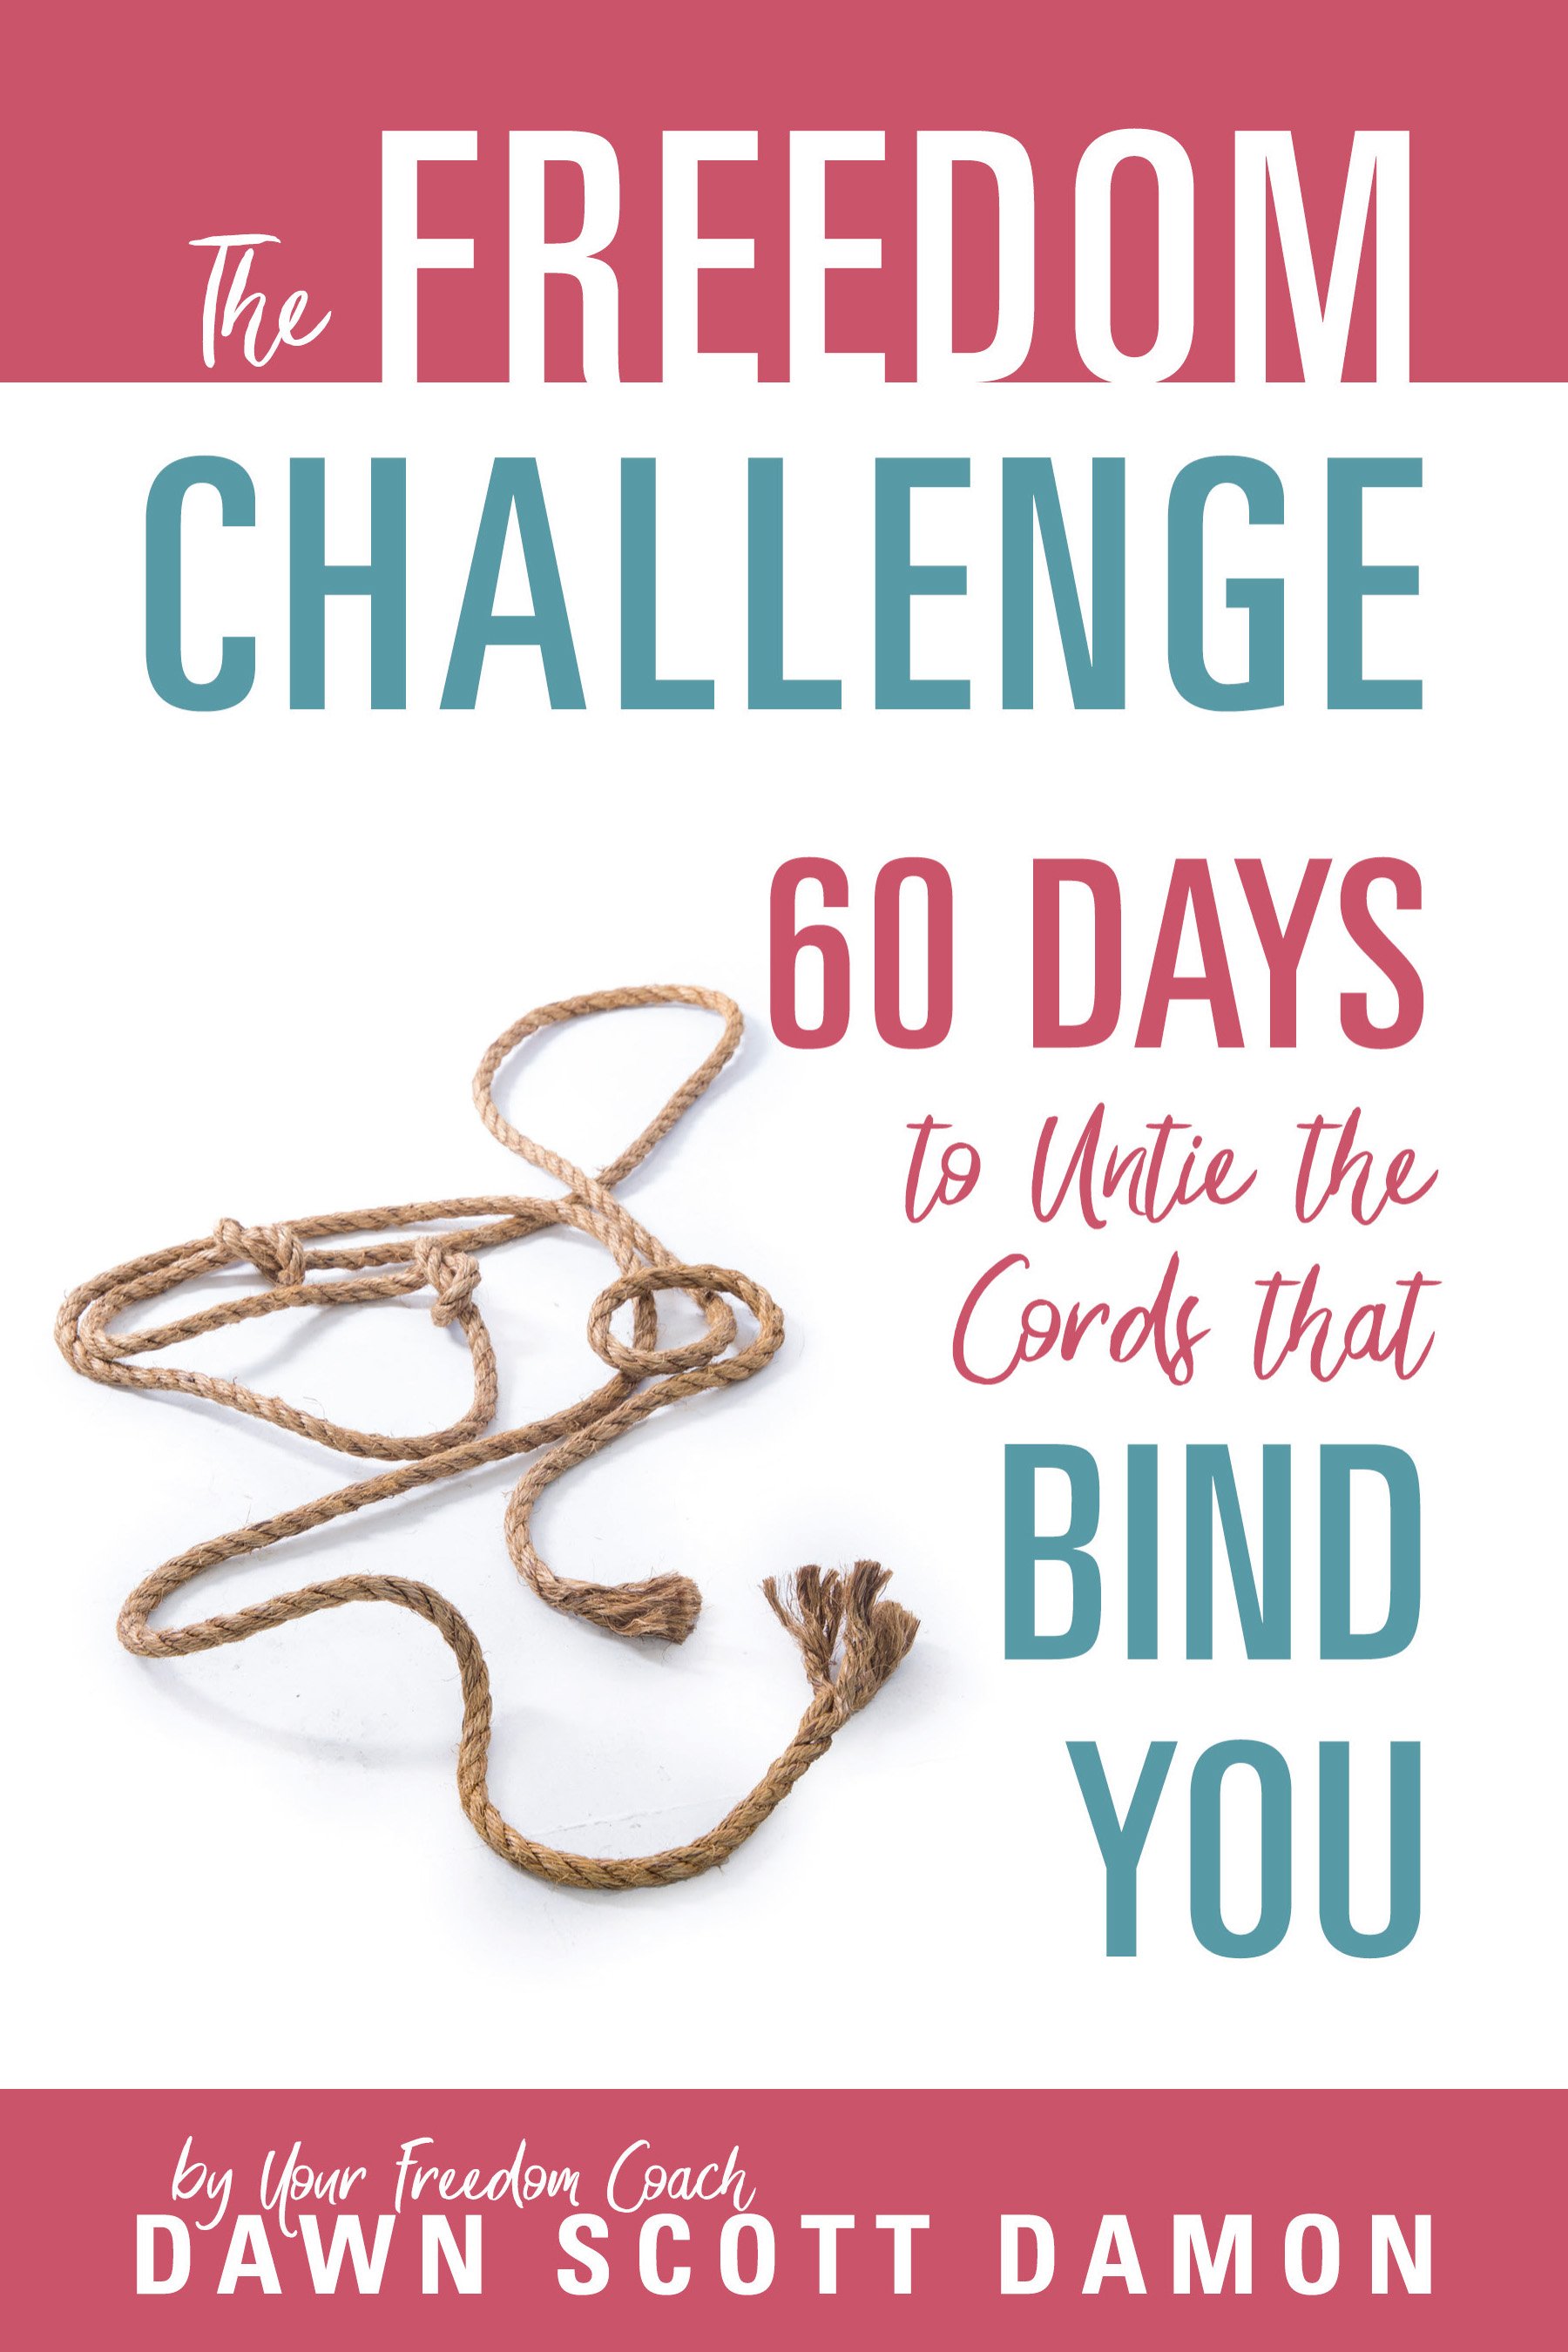 The Freedom Challenge: 60 Days To Untie the Cords that Bind You